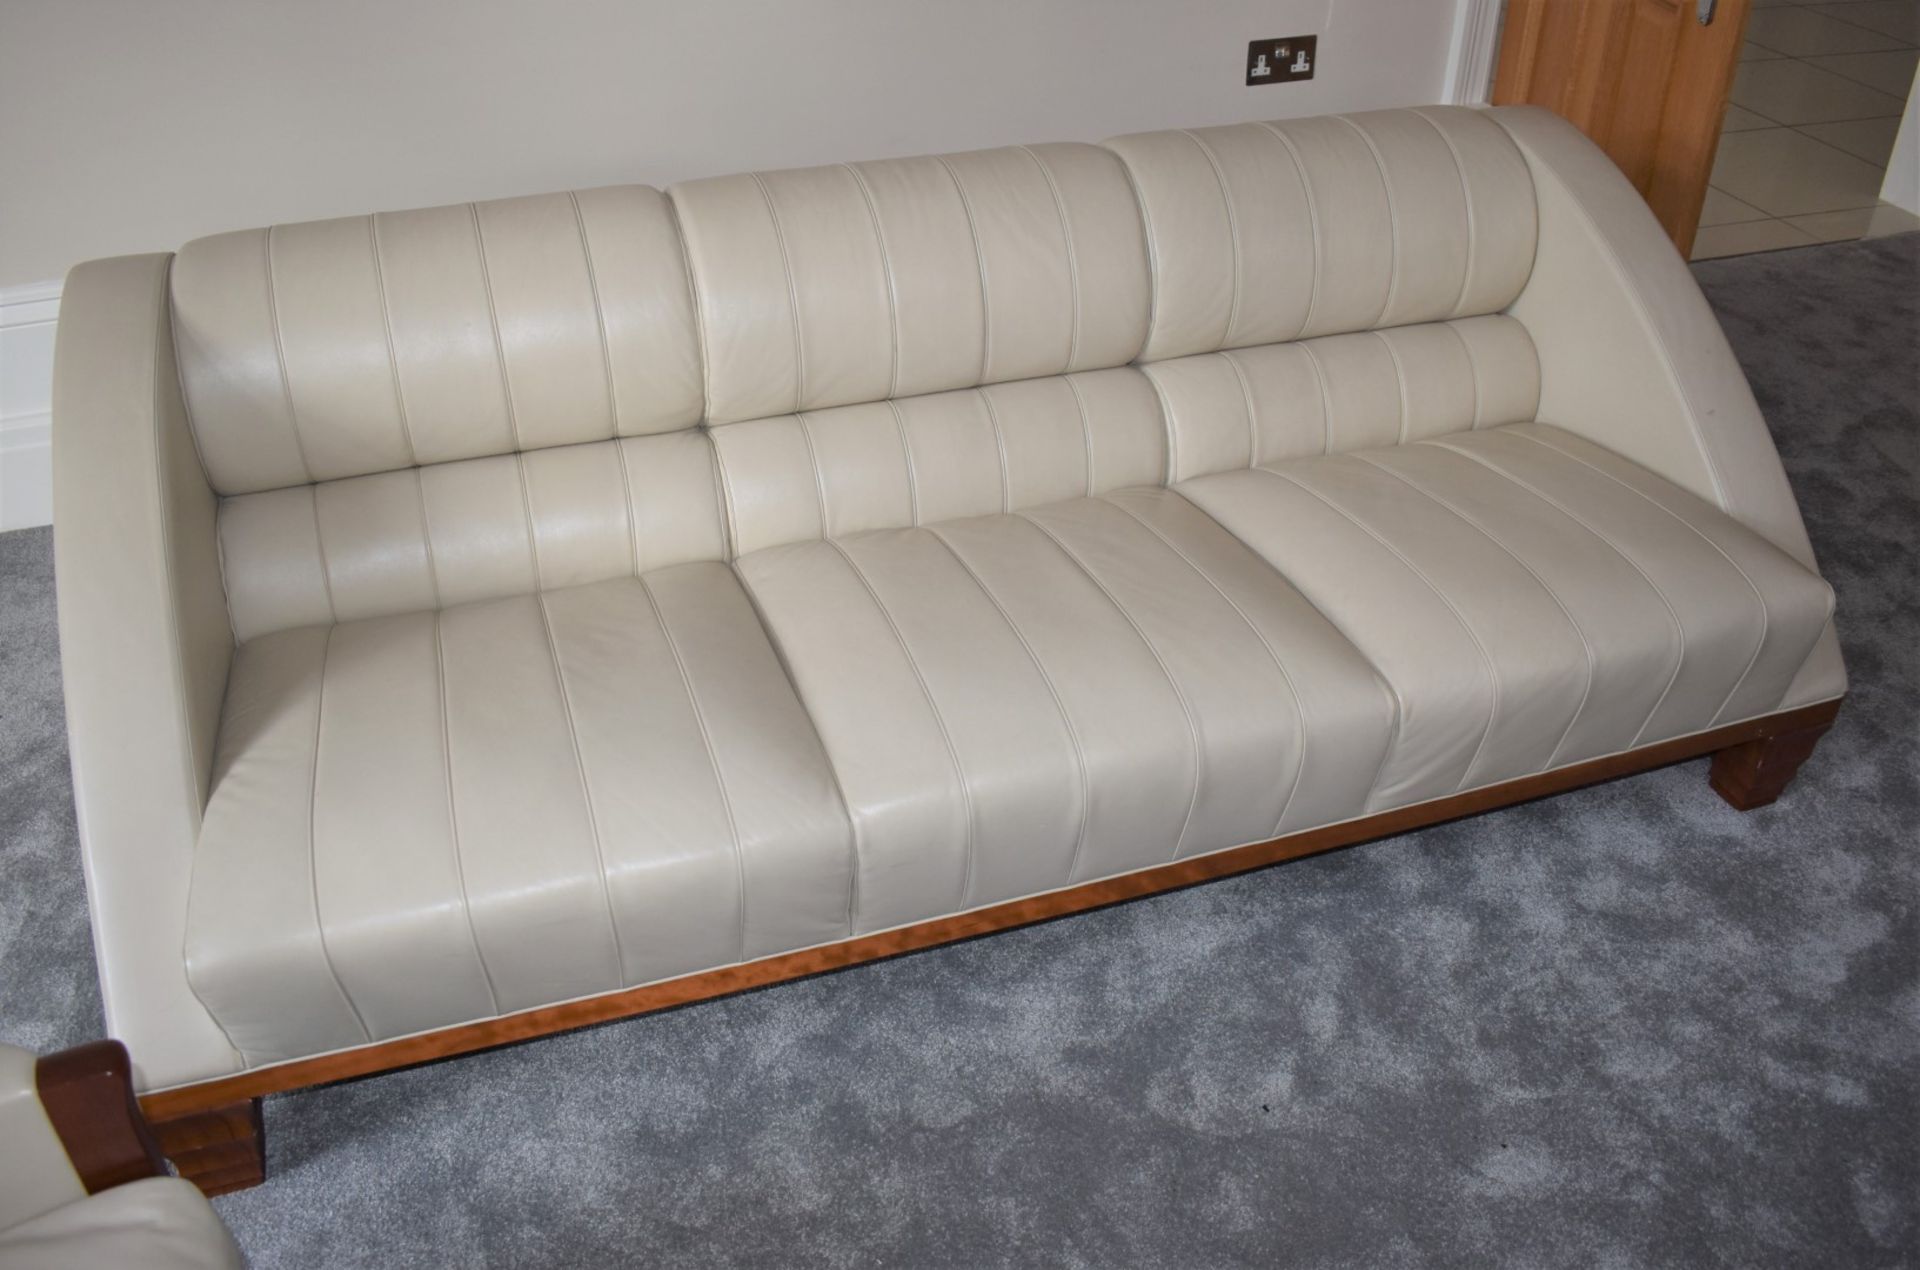 1 x Giorgetti Aries Three Seater Leather Sofa - Designed by Leon Krier - Contemporary Sofa - Image 10 of 10